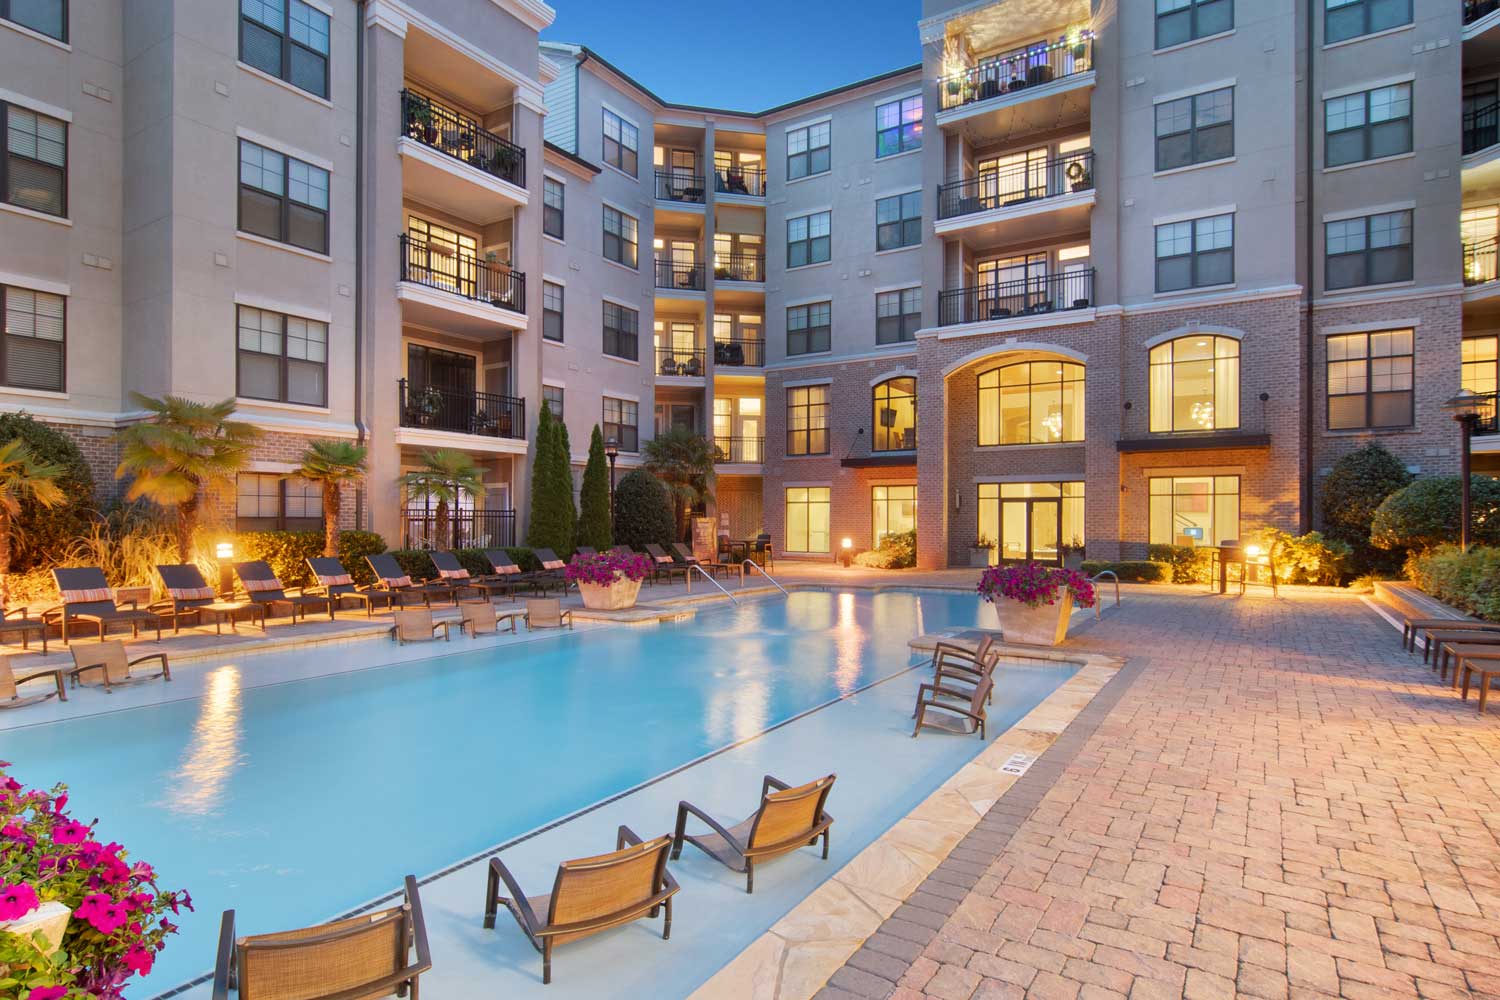 Outdoor Swimming Pool at the Brookleigh Flats Apartments in Brookhaven, GA